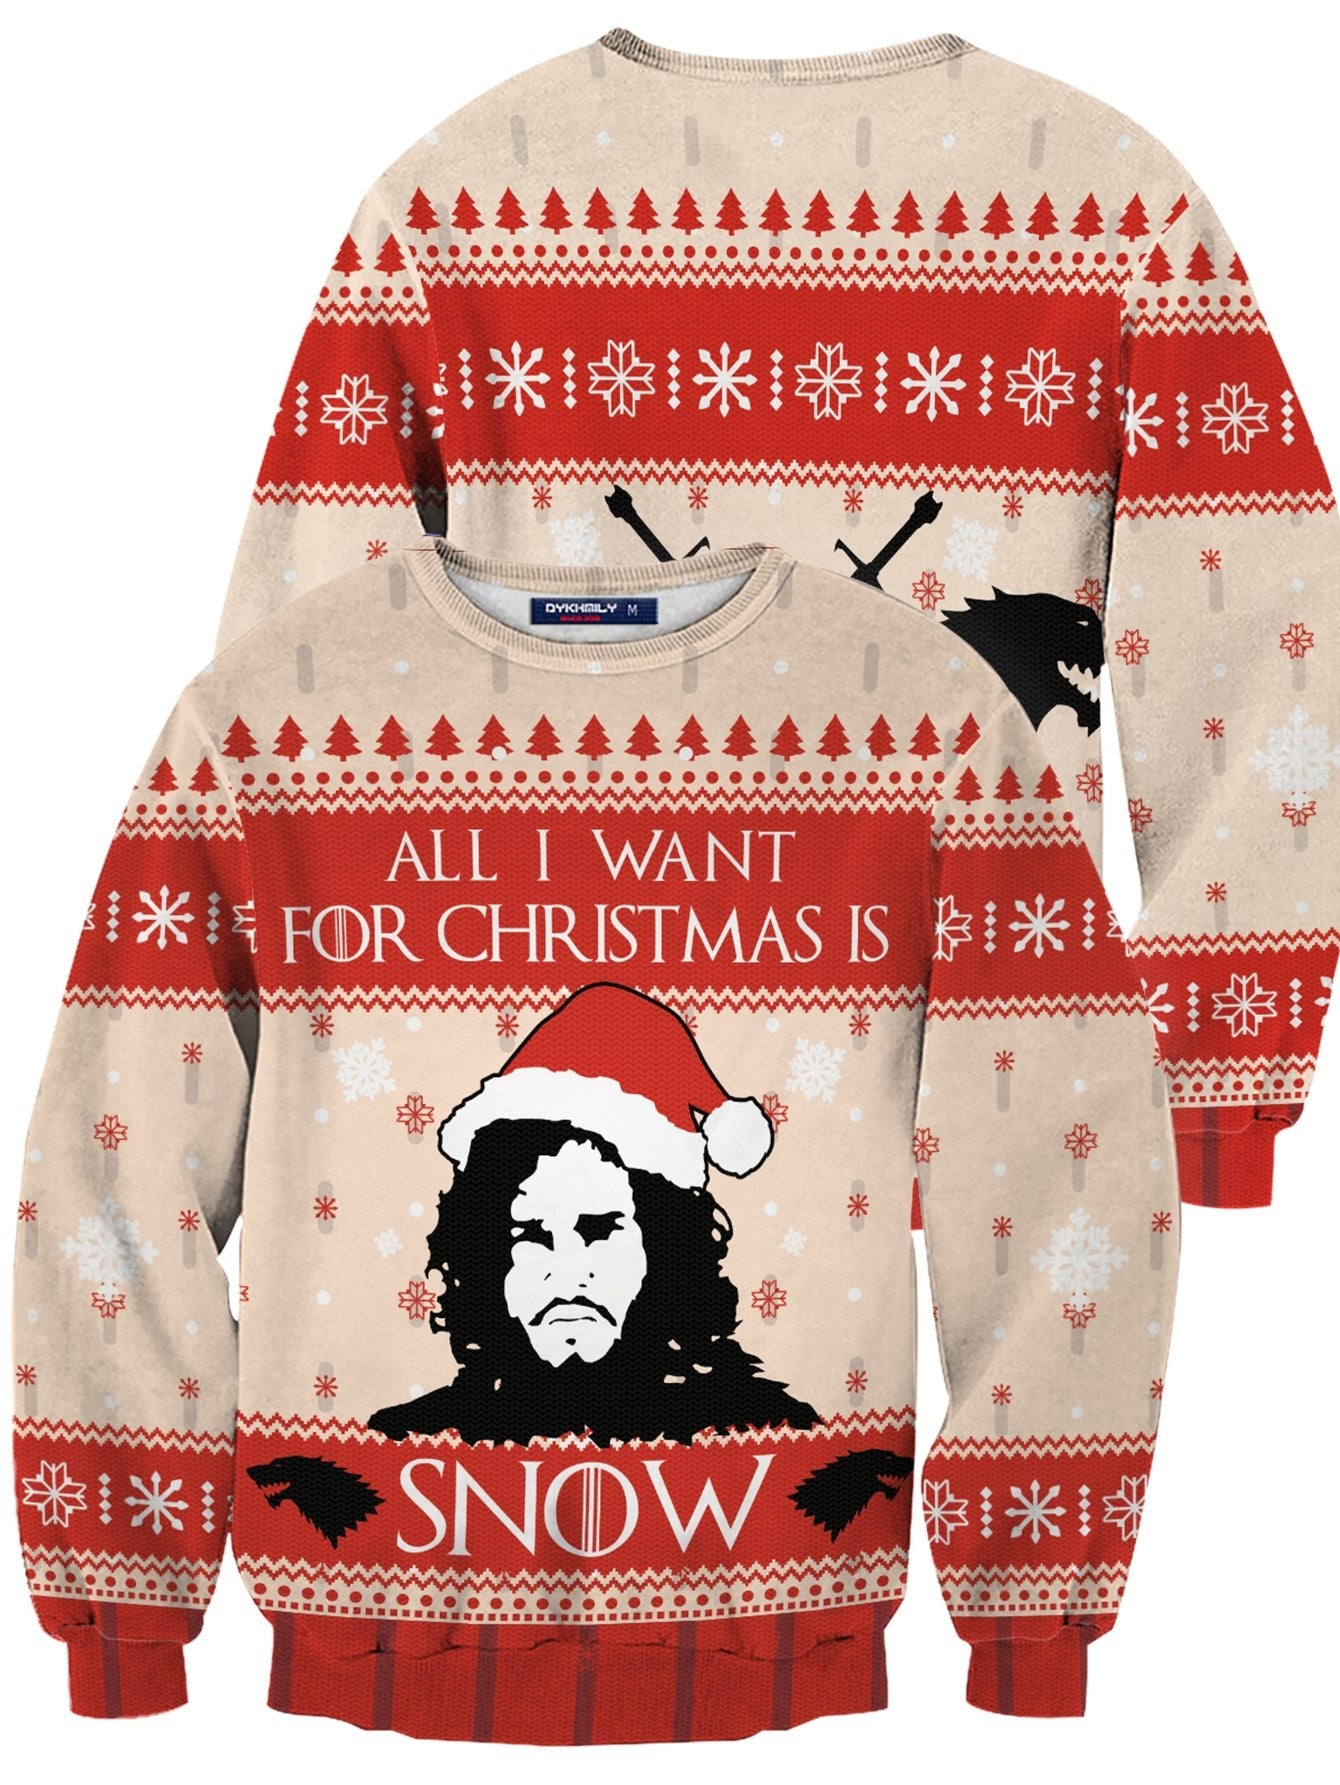 Fandomaniax - All I Want For Christmas is Snow Unisex Wool Sweater